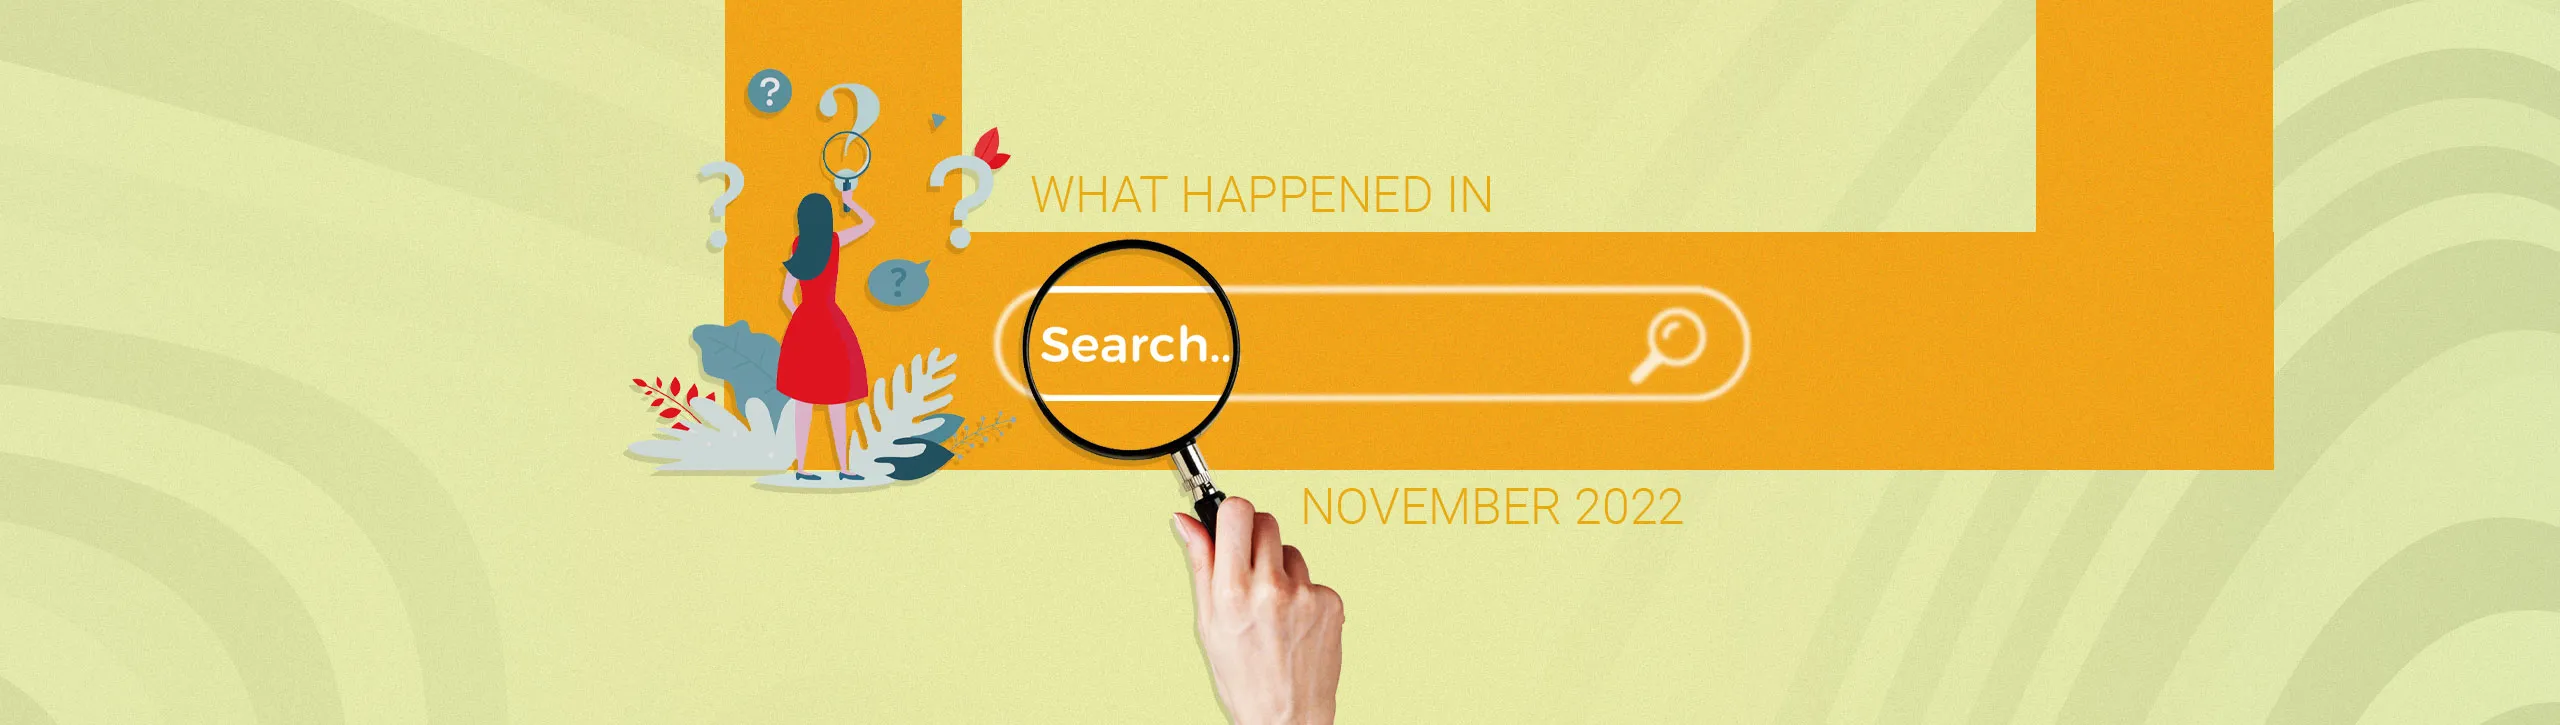 Google Search Updates – November ’21 Changes